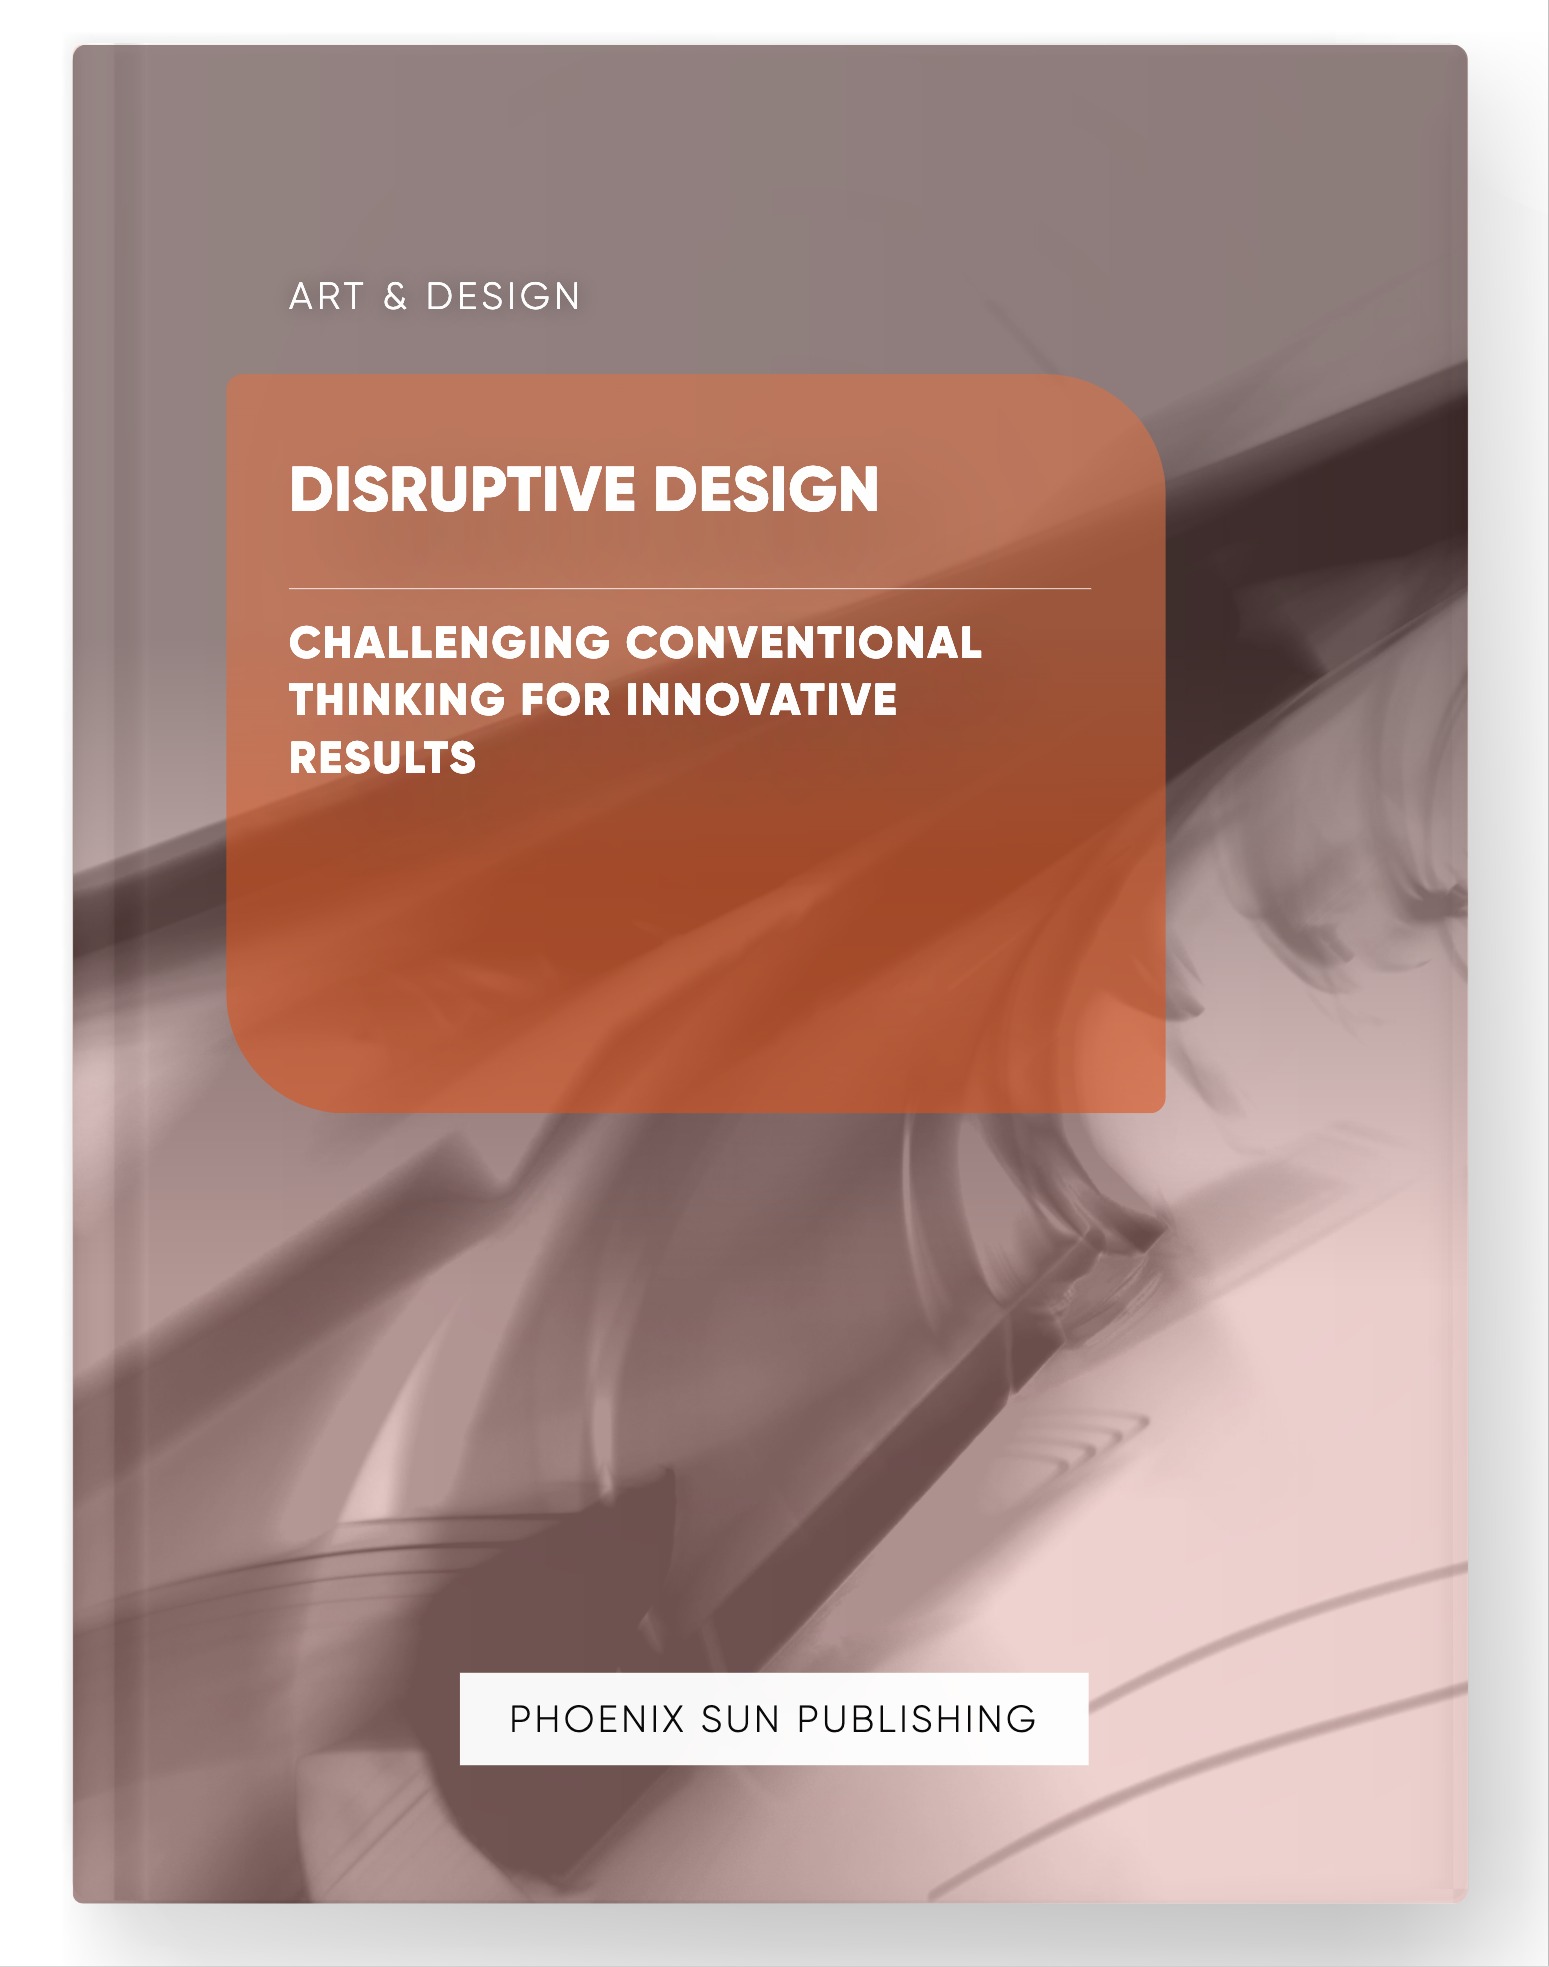 Disruptive Design – Challenging Conventional Thinking for Innovative Results